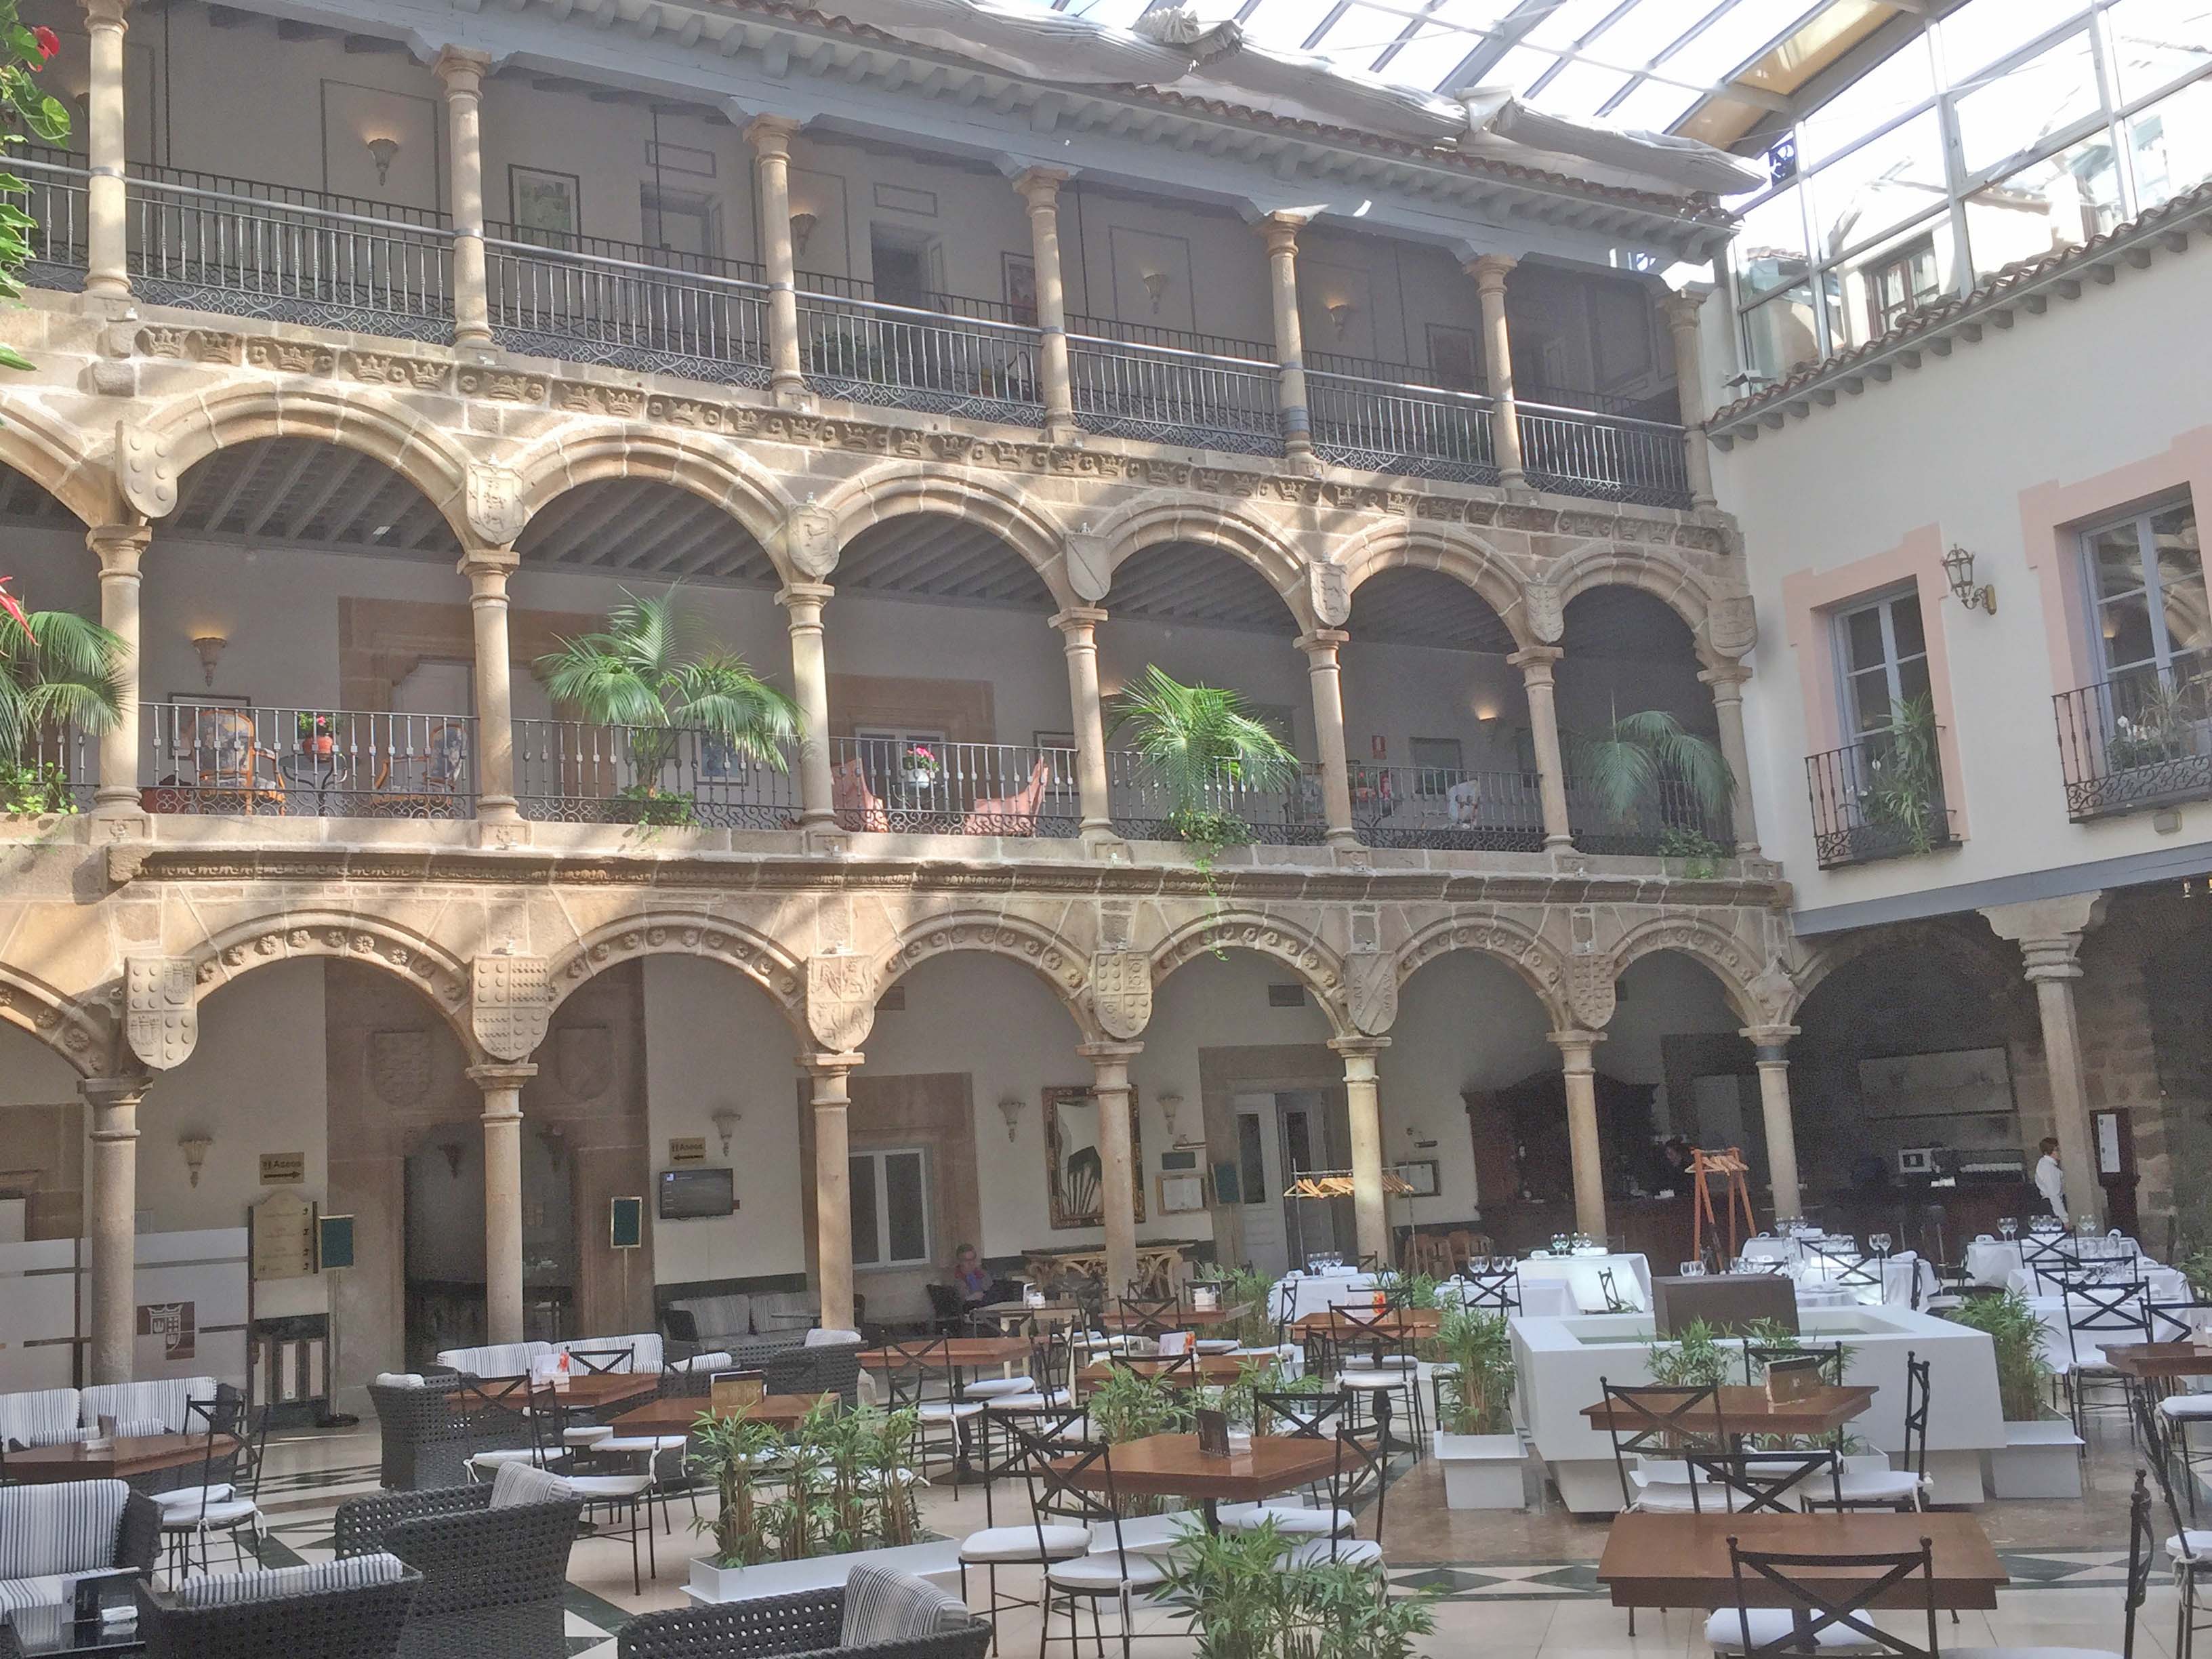 The inside of one of our hotels. Not a bad setting for breakfast.